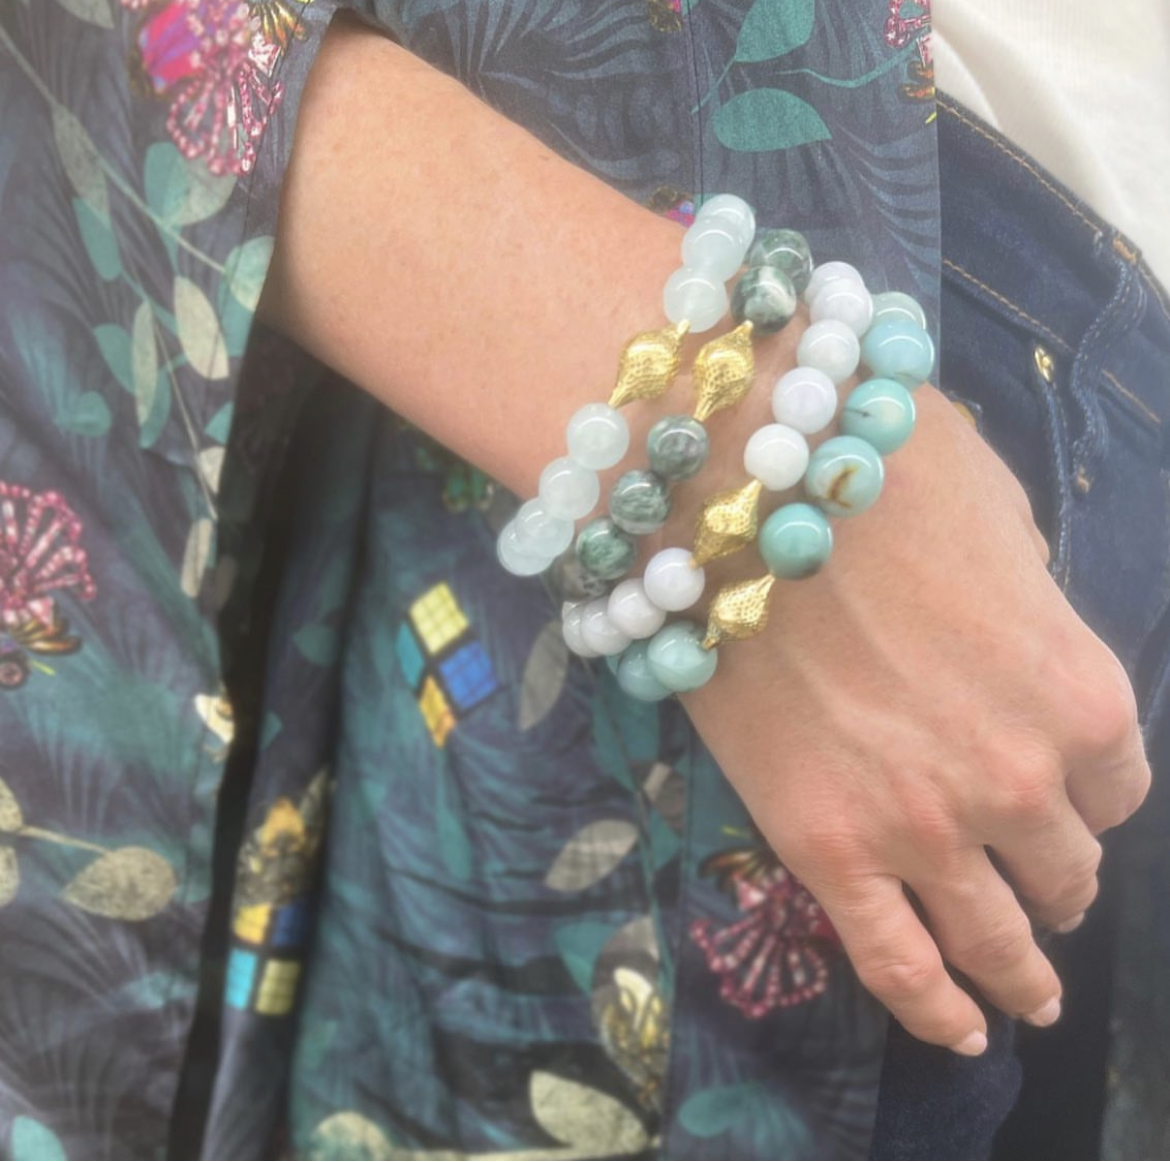 This is a photo of beaded stretch bracelets worn on the wrist